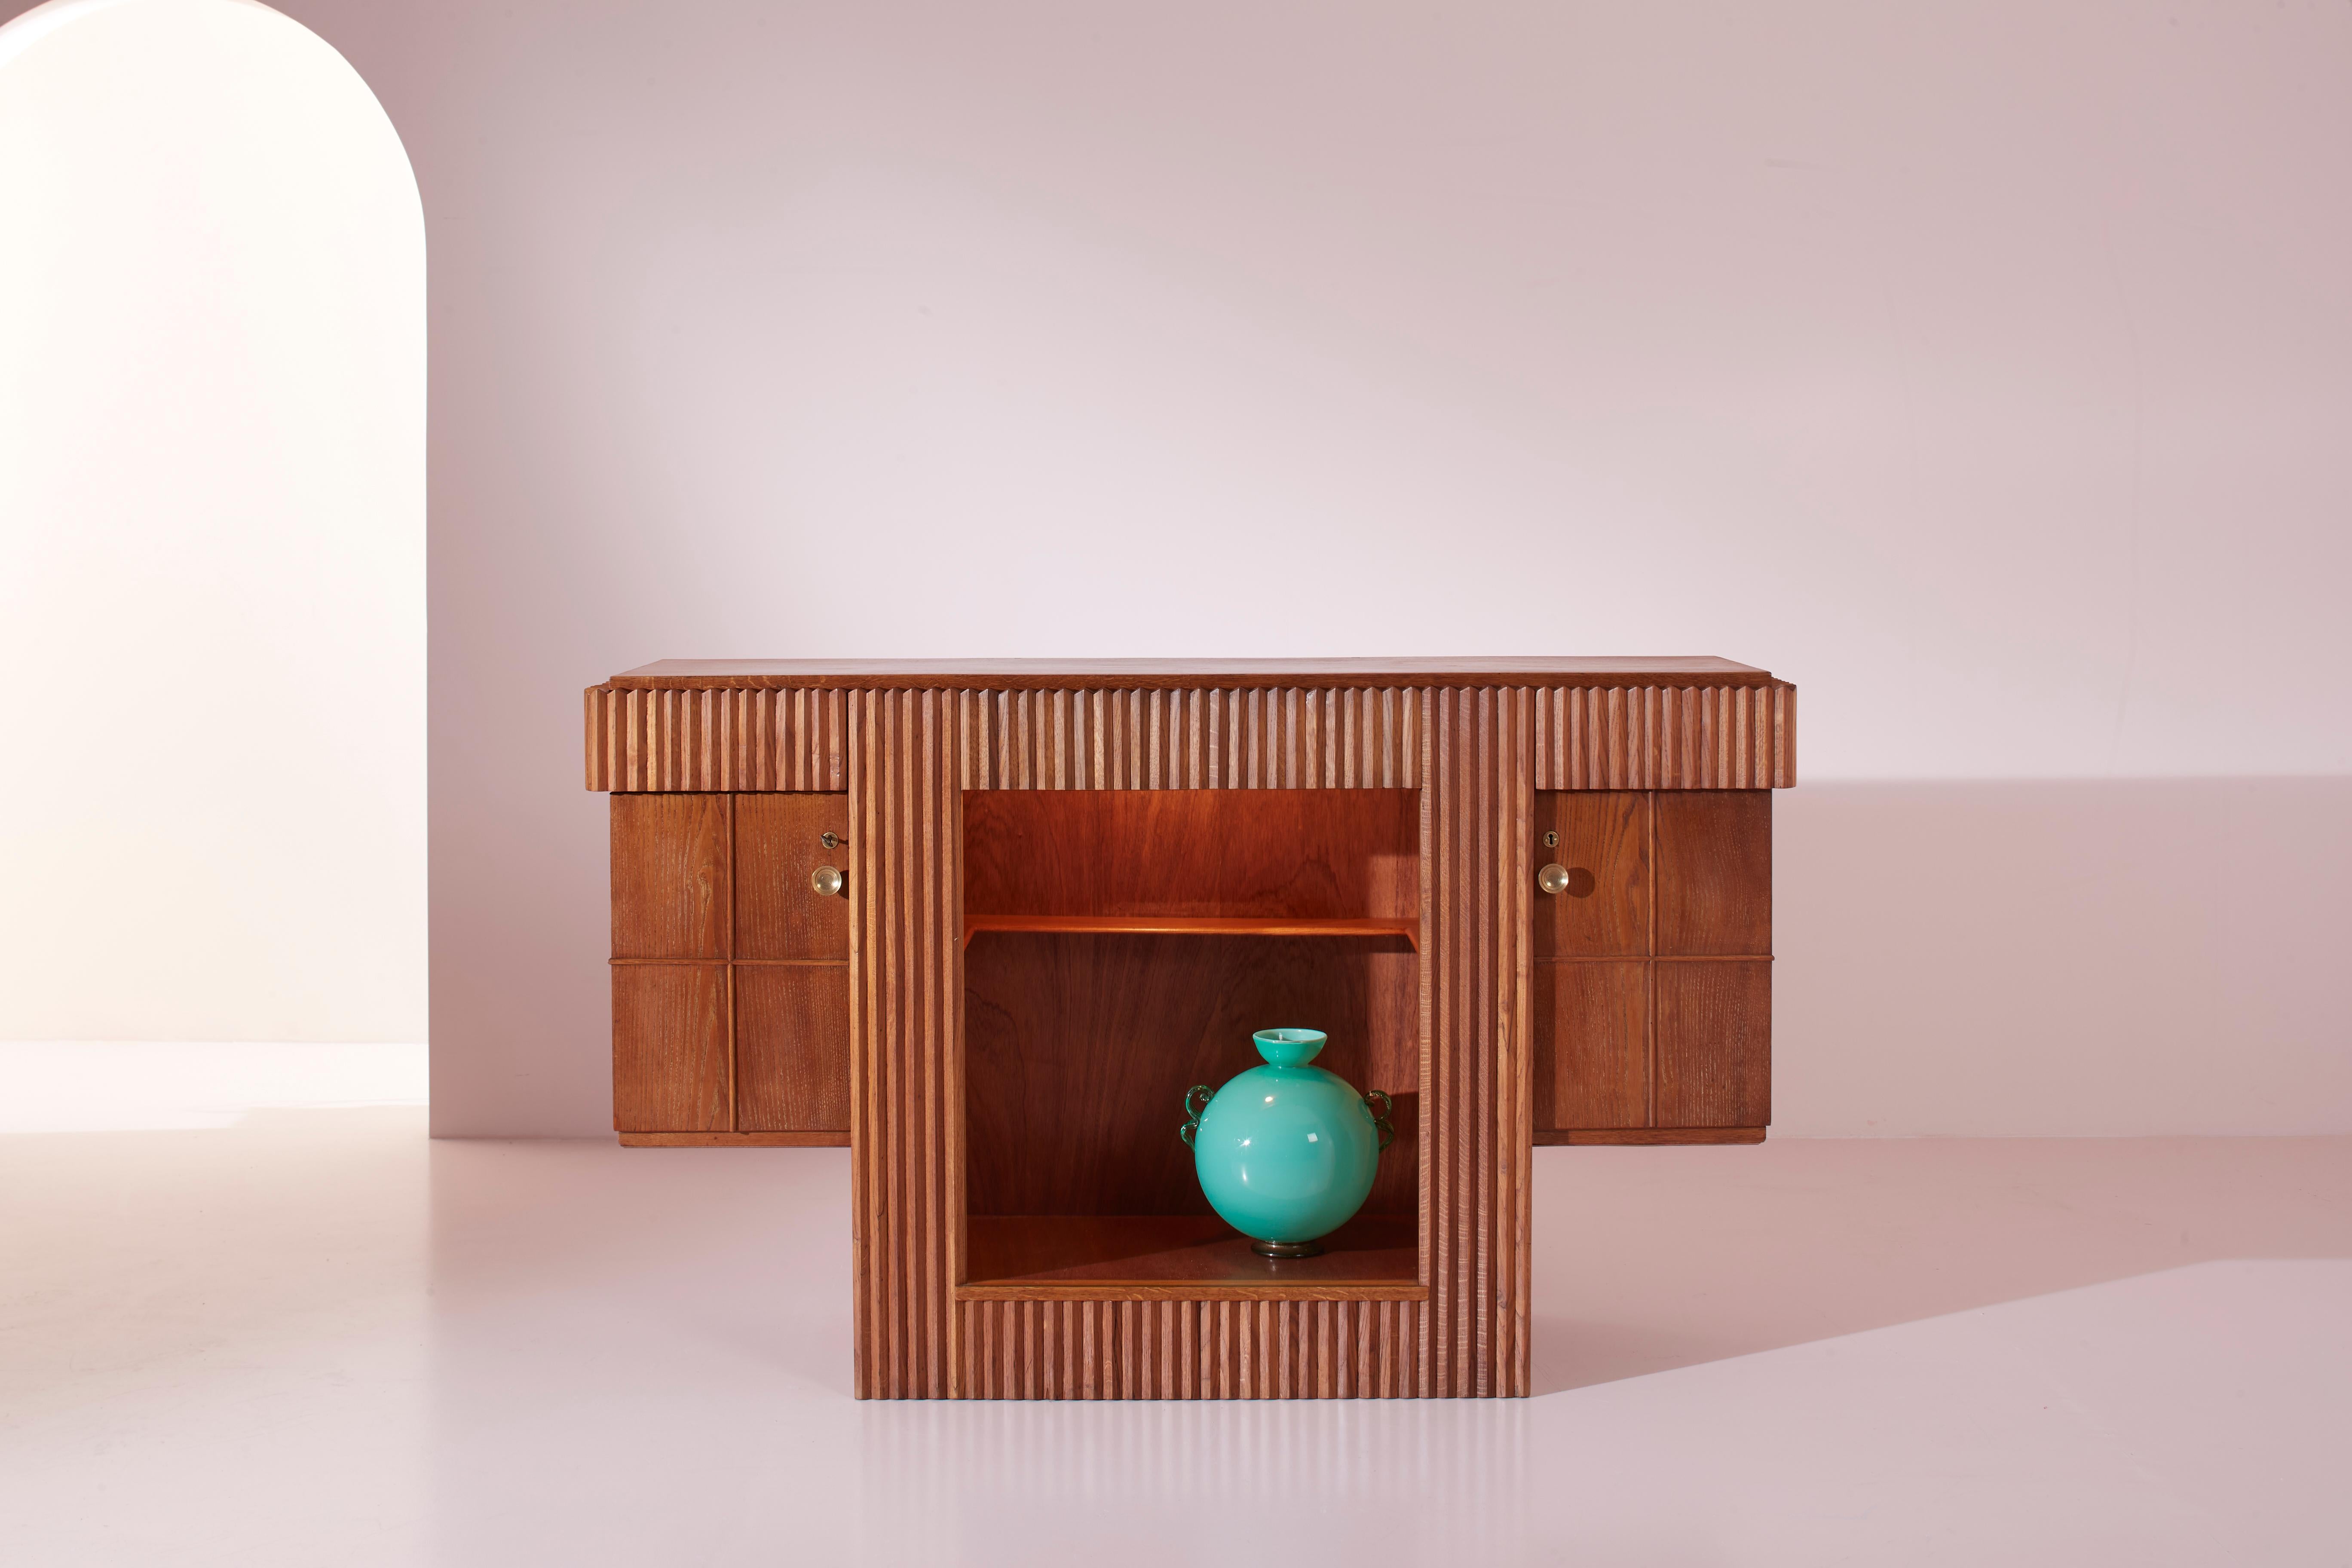 Bar cabinet with shelves and doors in oak wood, Italian craftsmanship from the 1940s, designed by Gio Ponti.

This oak furniture, a perfect addition to a reception area or a hospitality-focused lounge, stands out for its personality, immediately